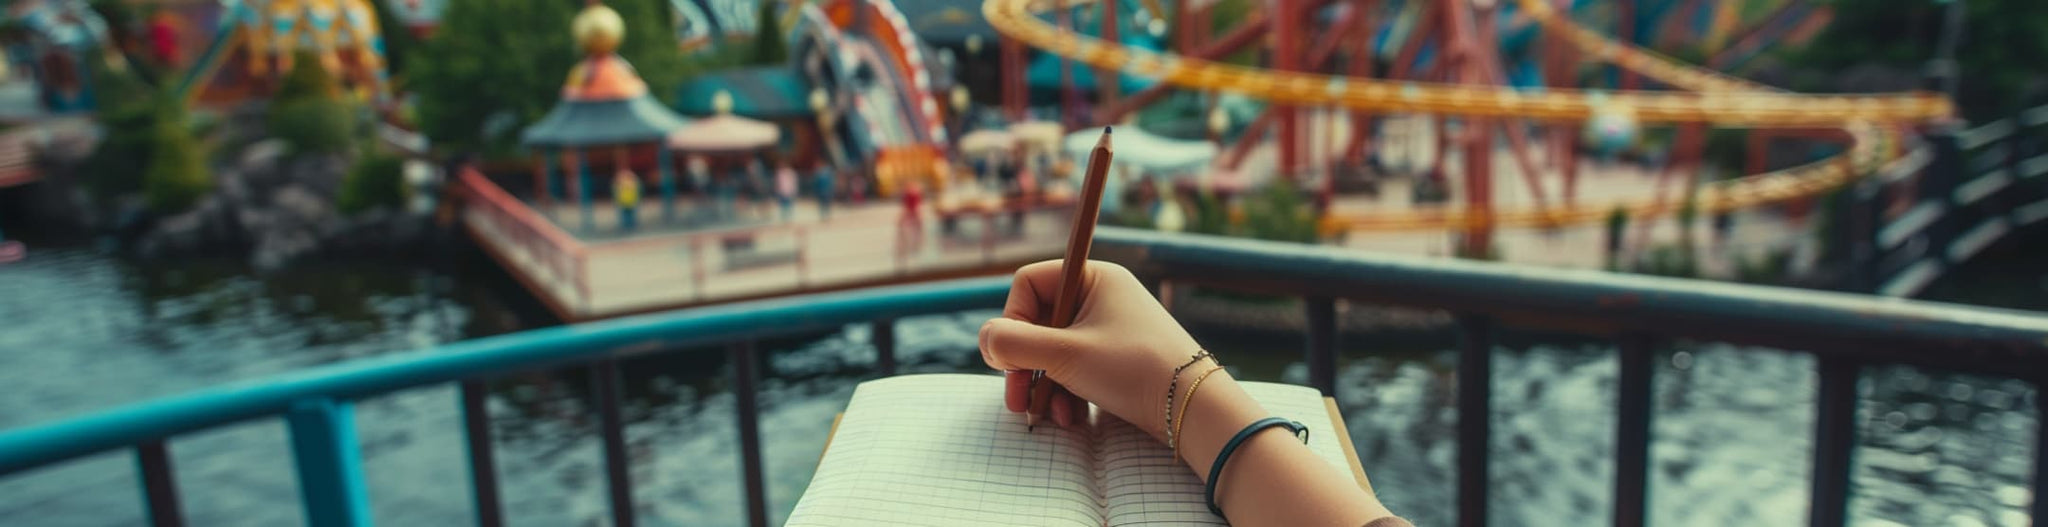 Journaling at a theme park, capturing their thrill ride experiences